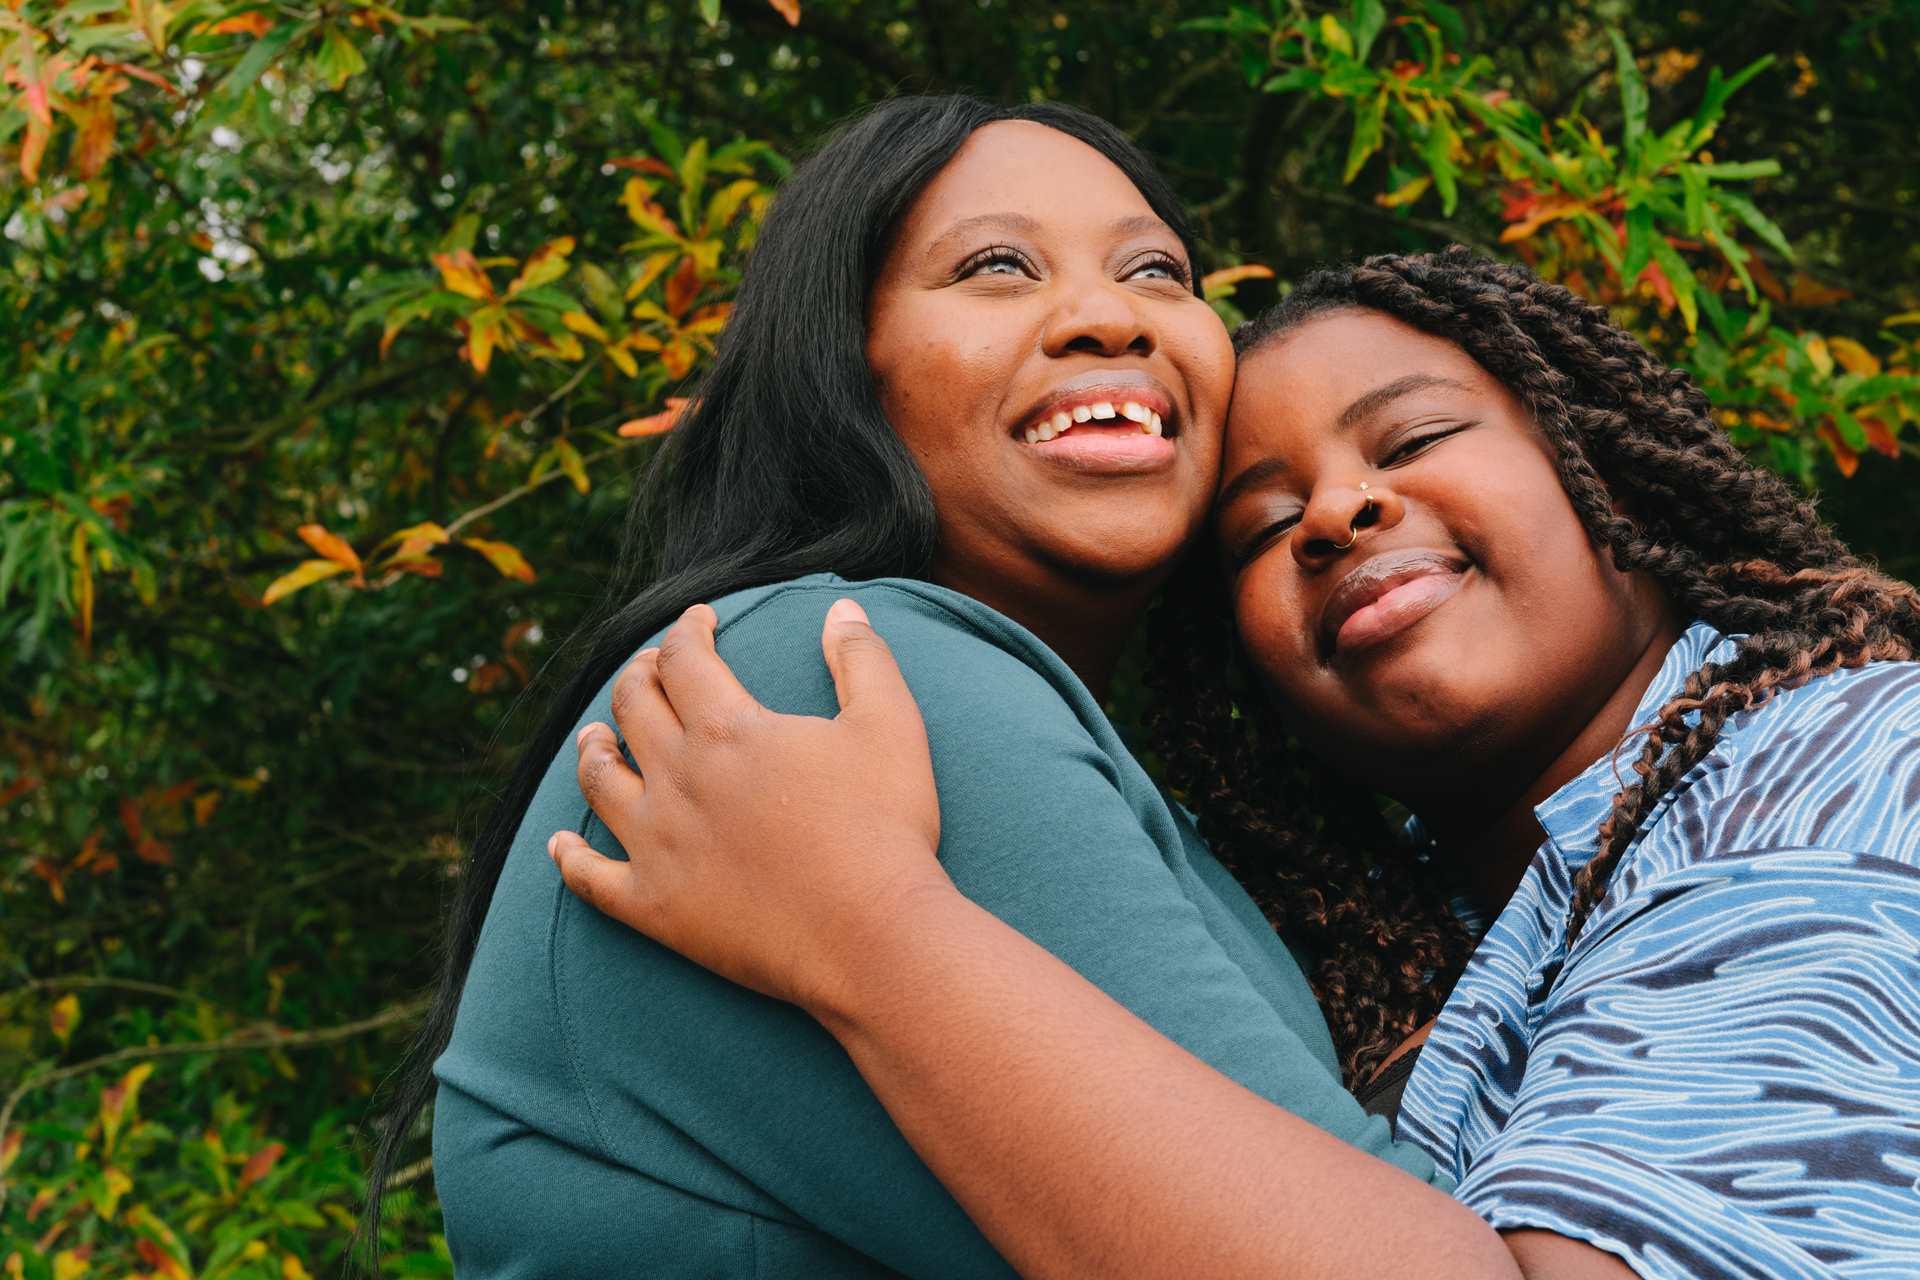 A young Black woman hugging an older Black woman in the park on a bench. They are both smiling.